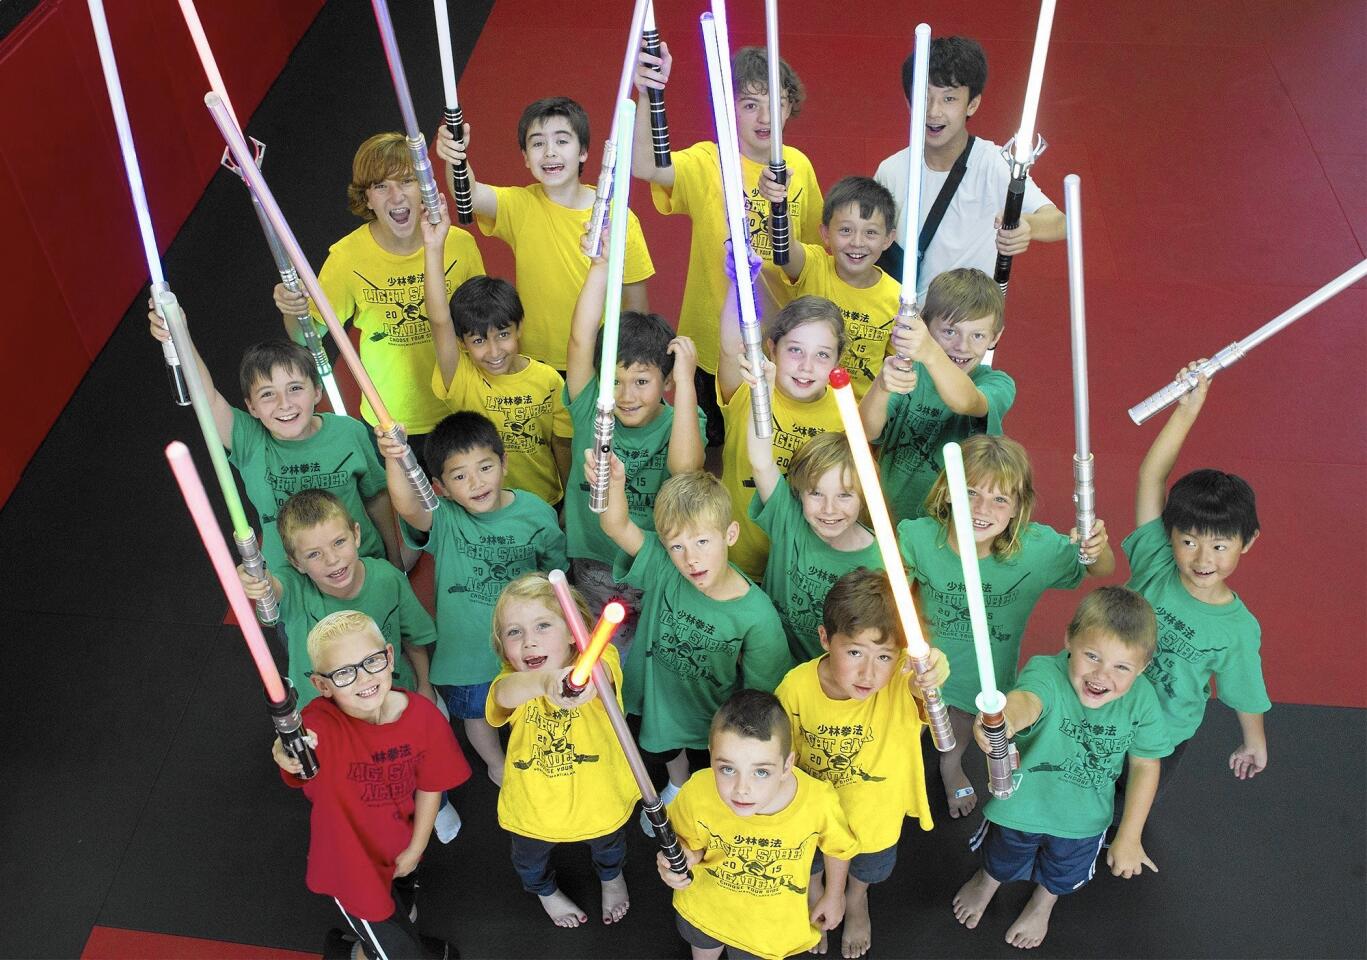 This group of 21 children, ages 5-13, took part in United Studios of Self Defense's five-day Light Saber Academy, held from July 20-24.